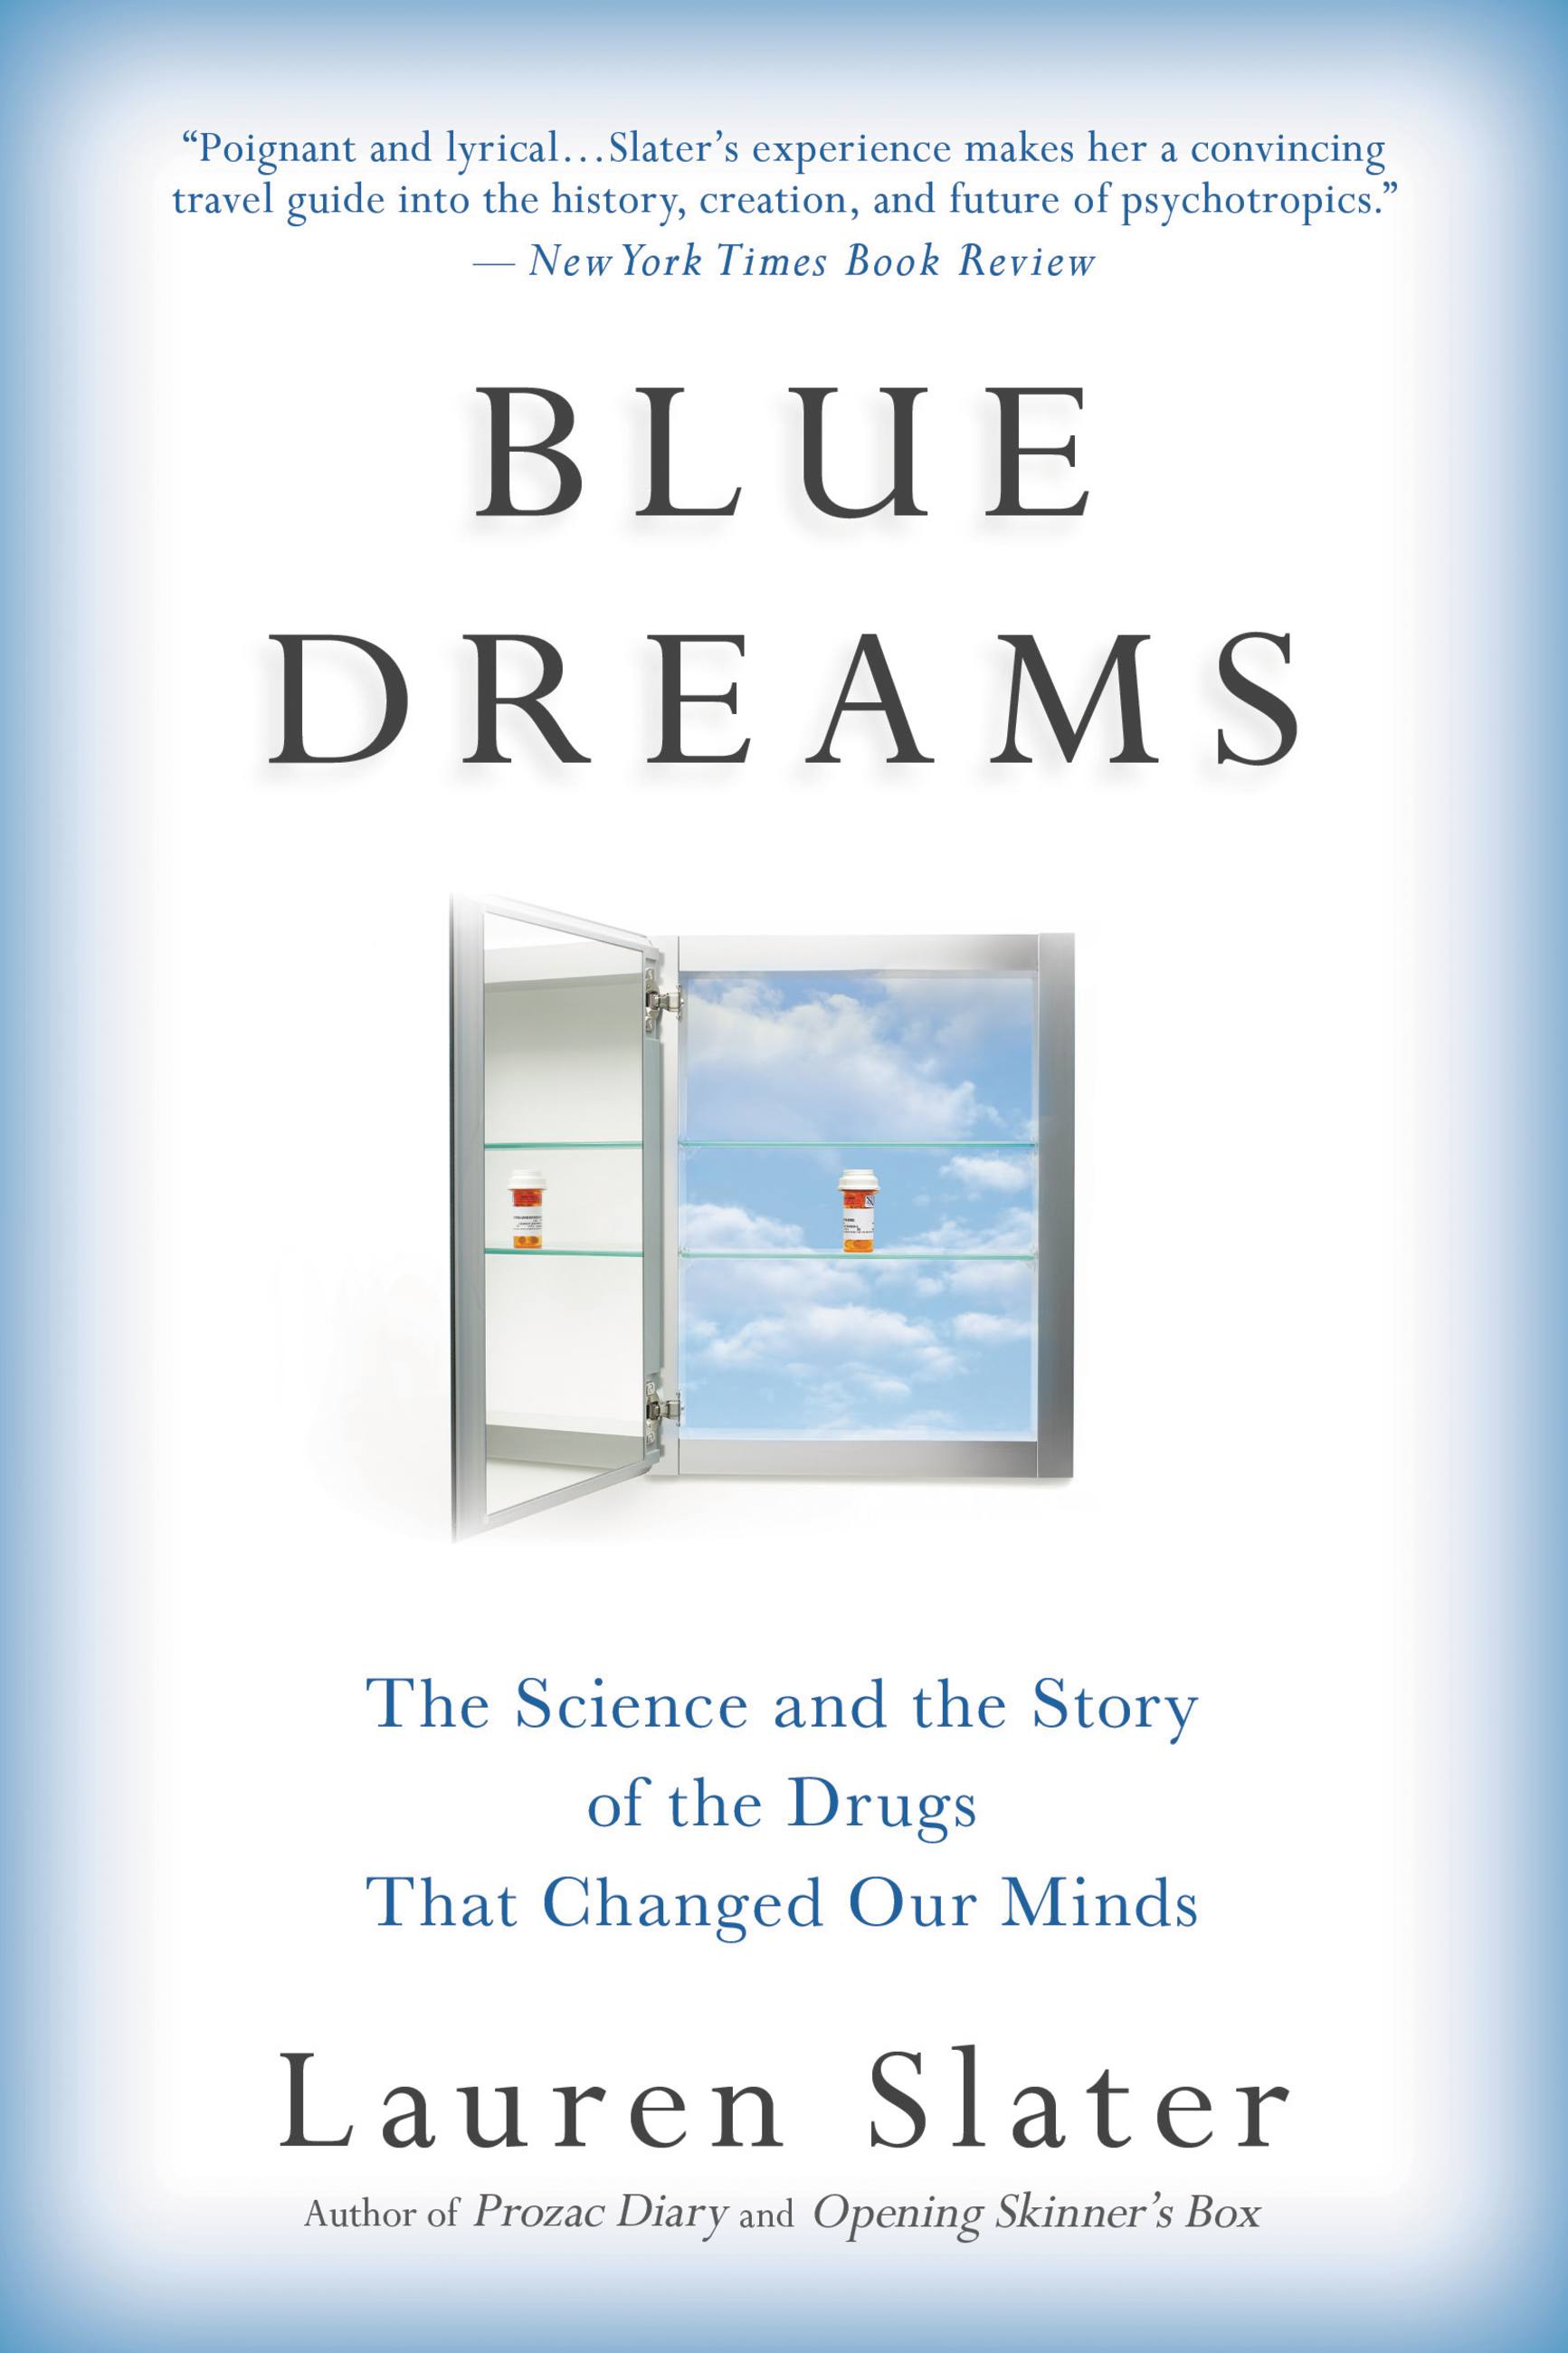 Image de couverture de Blue Dreams [electronic resource] : The Science and the Story of the Drugs that Changed Our Minds